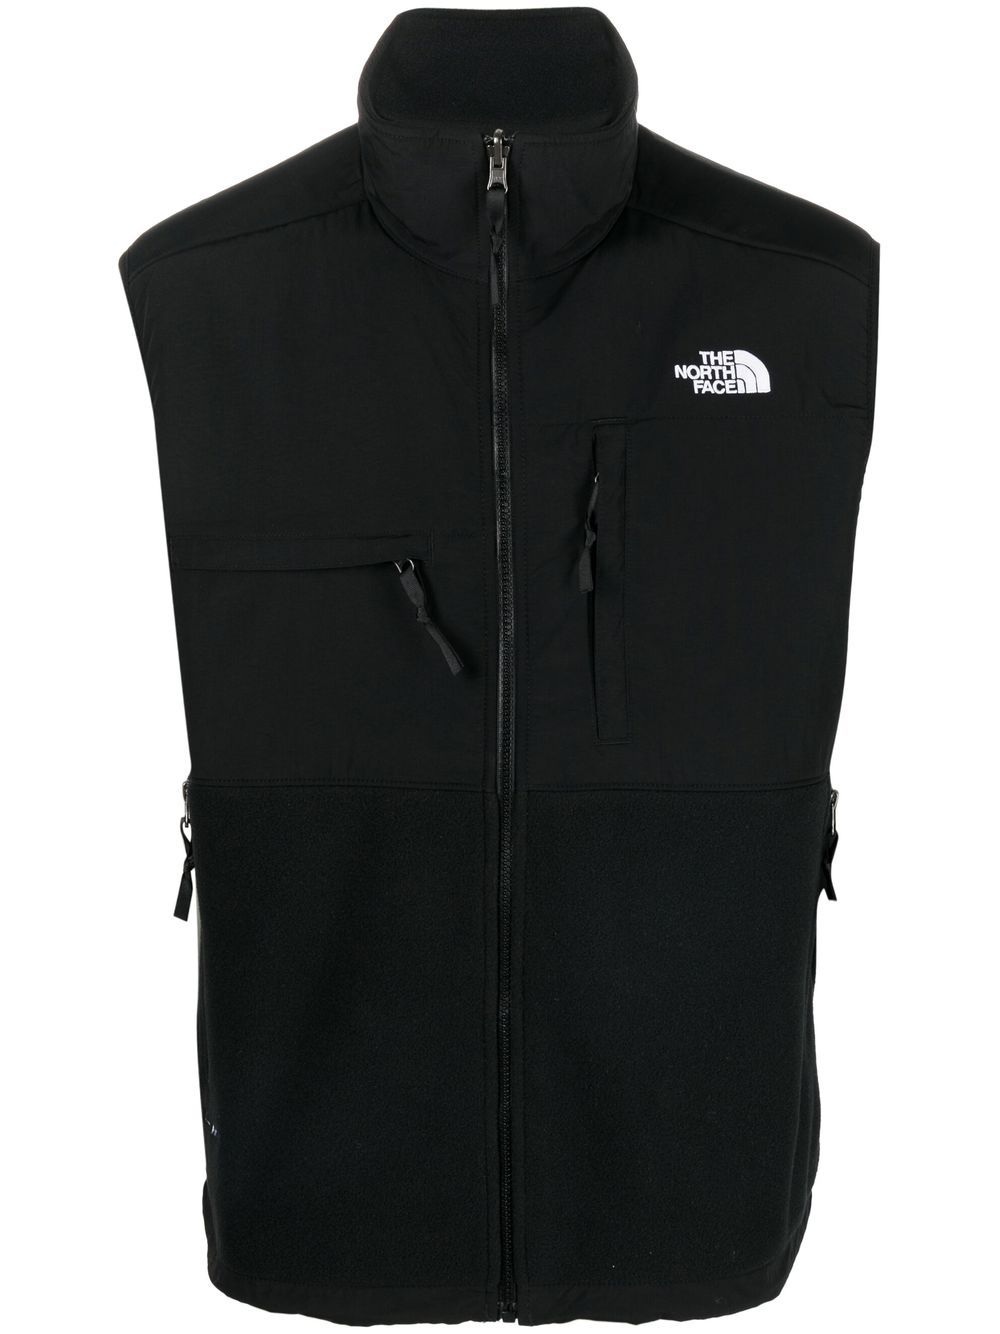 The North Face embroidered-logo zip-up gilet - Black von The North Face